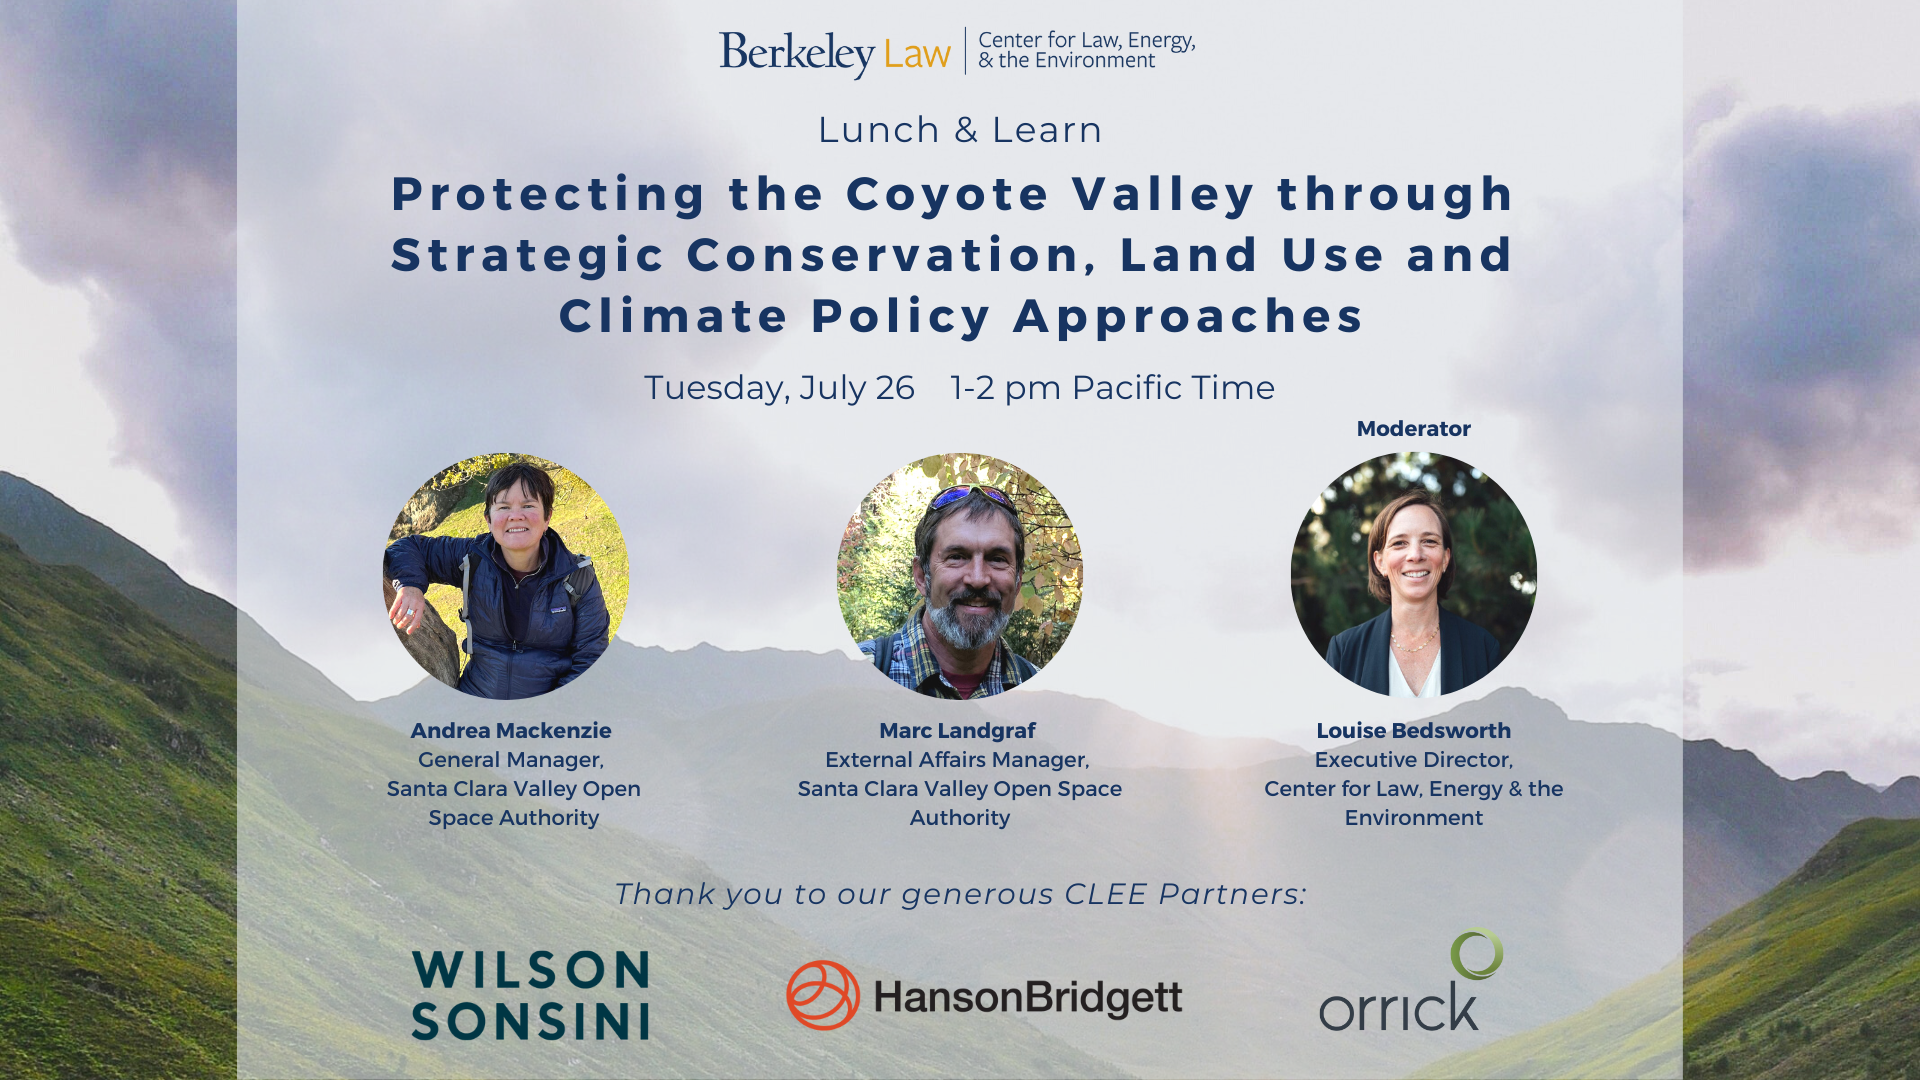 Flyer for Protecting the Coyote Valley through Strategic Conservation, Land Use and Climate Policy Approaches